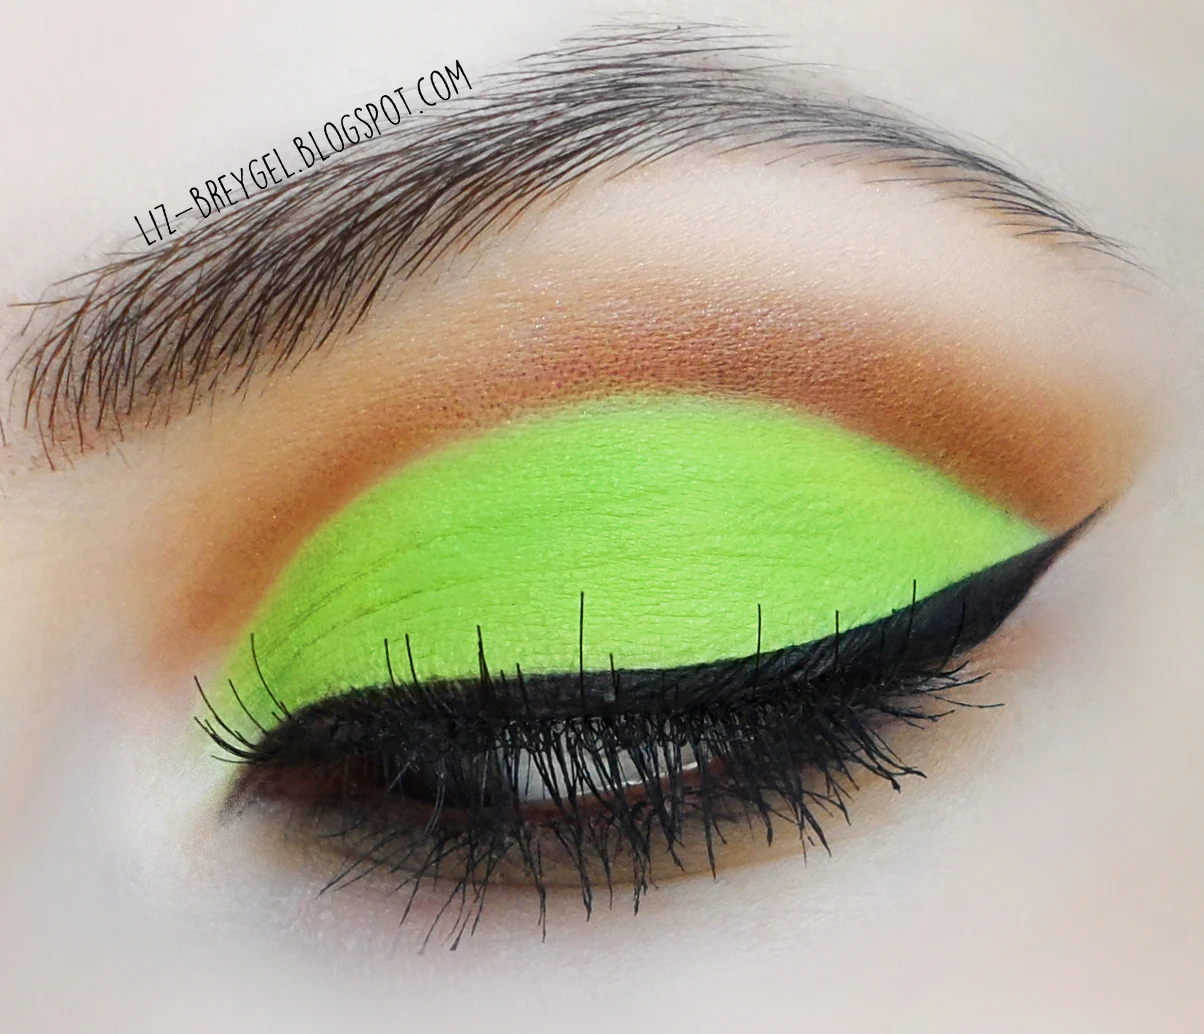 a bright matte green makeup look with a step-by-step tutorial featuring cat eyeliner and pictorial